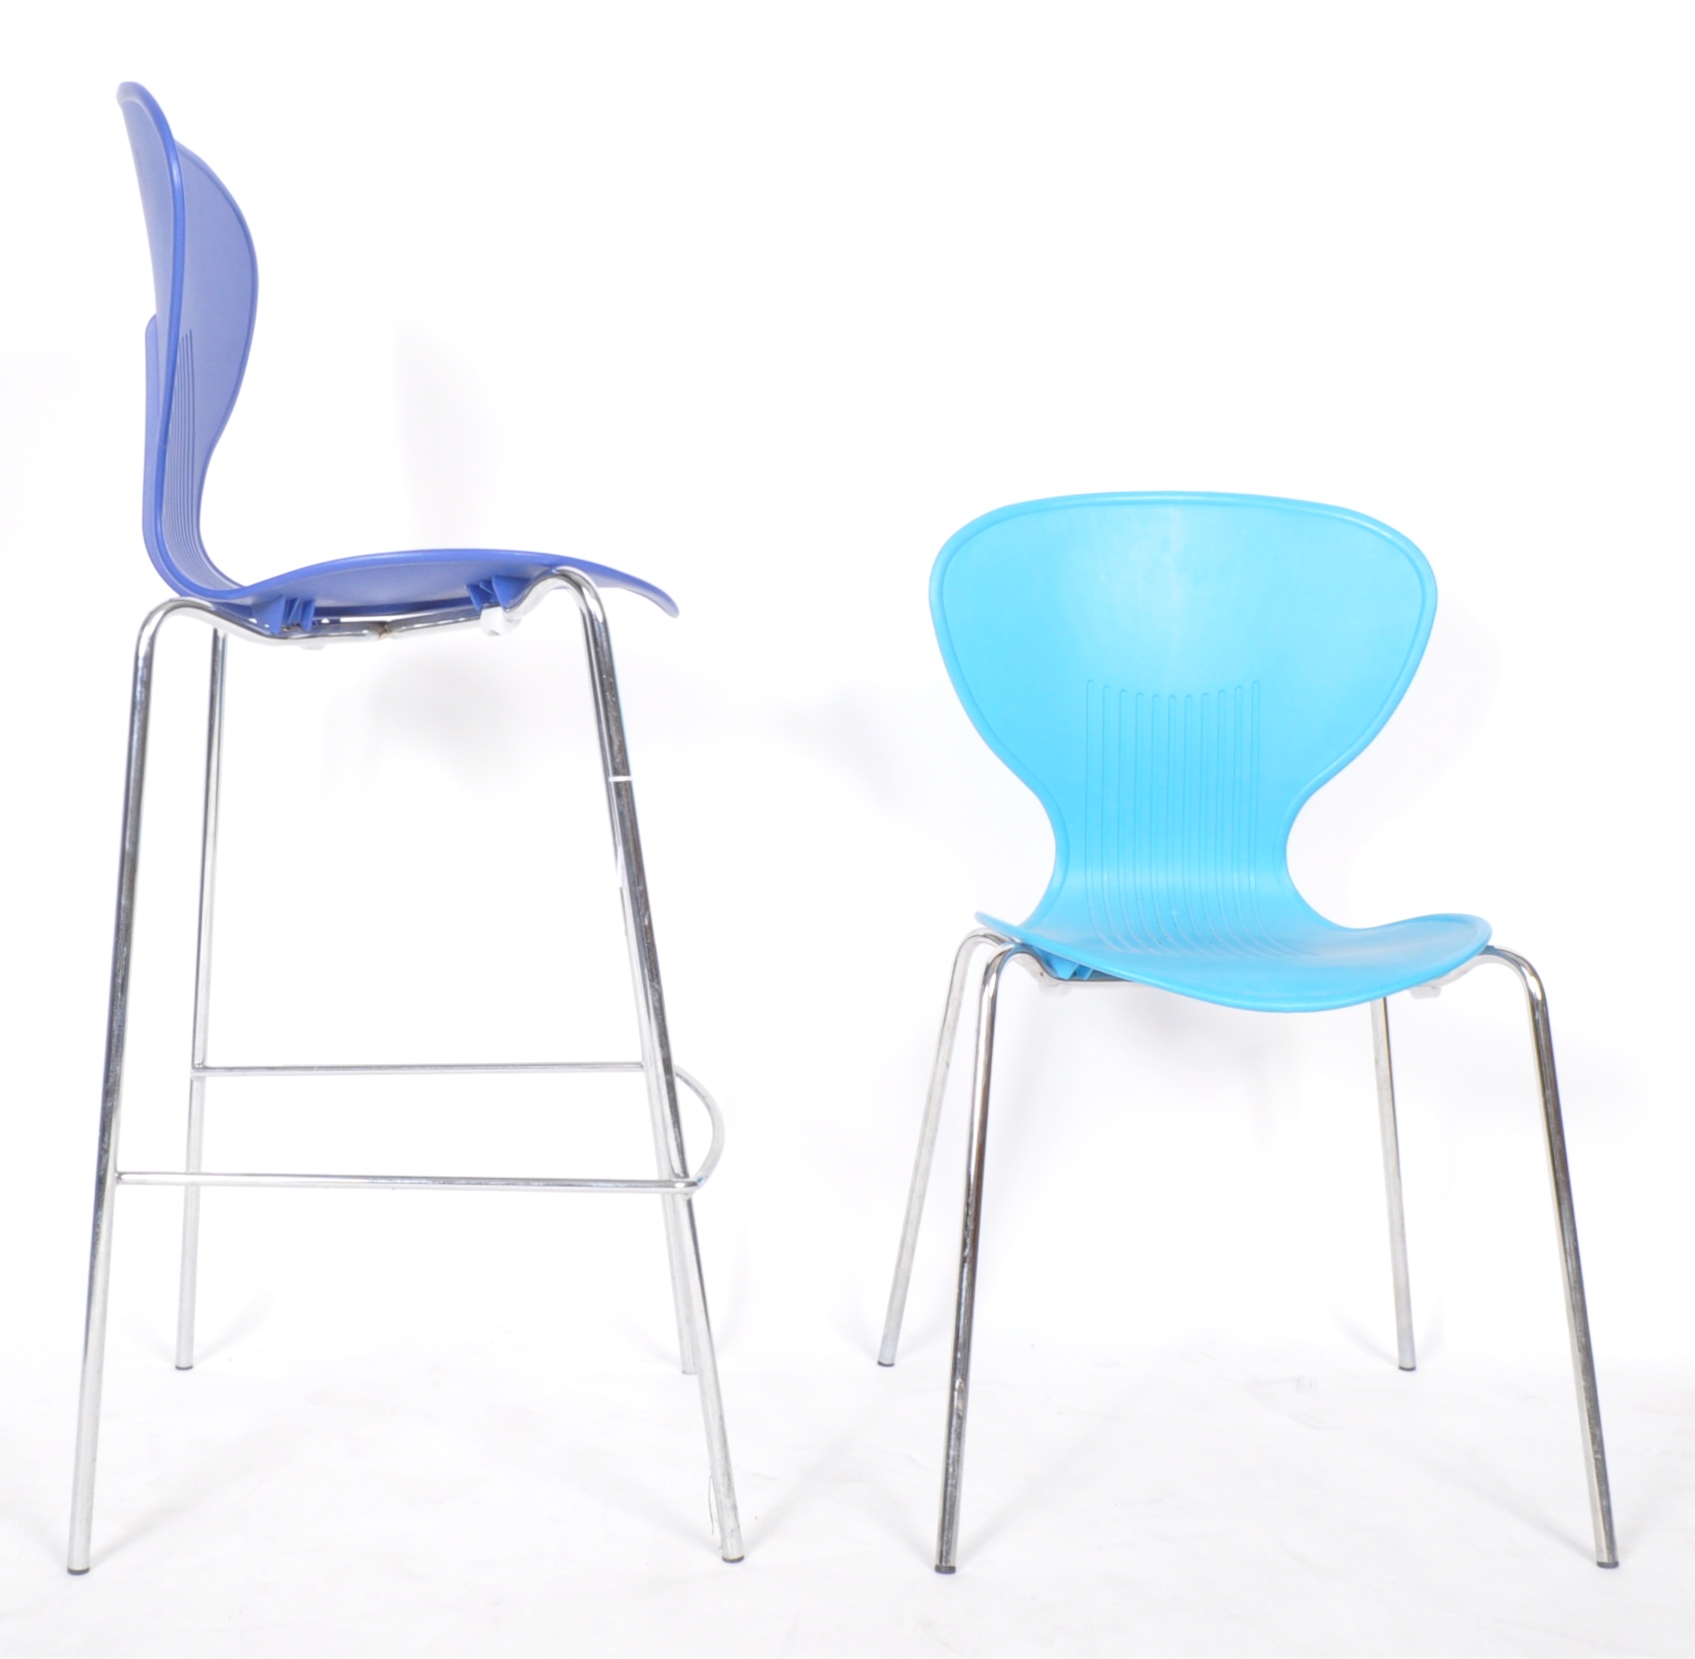 ROCHESTER POLY KEELER CHAIRS & STOOL - Image 8 of 9